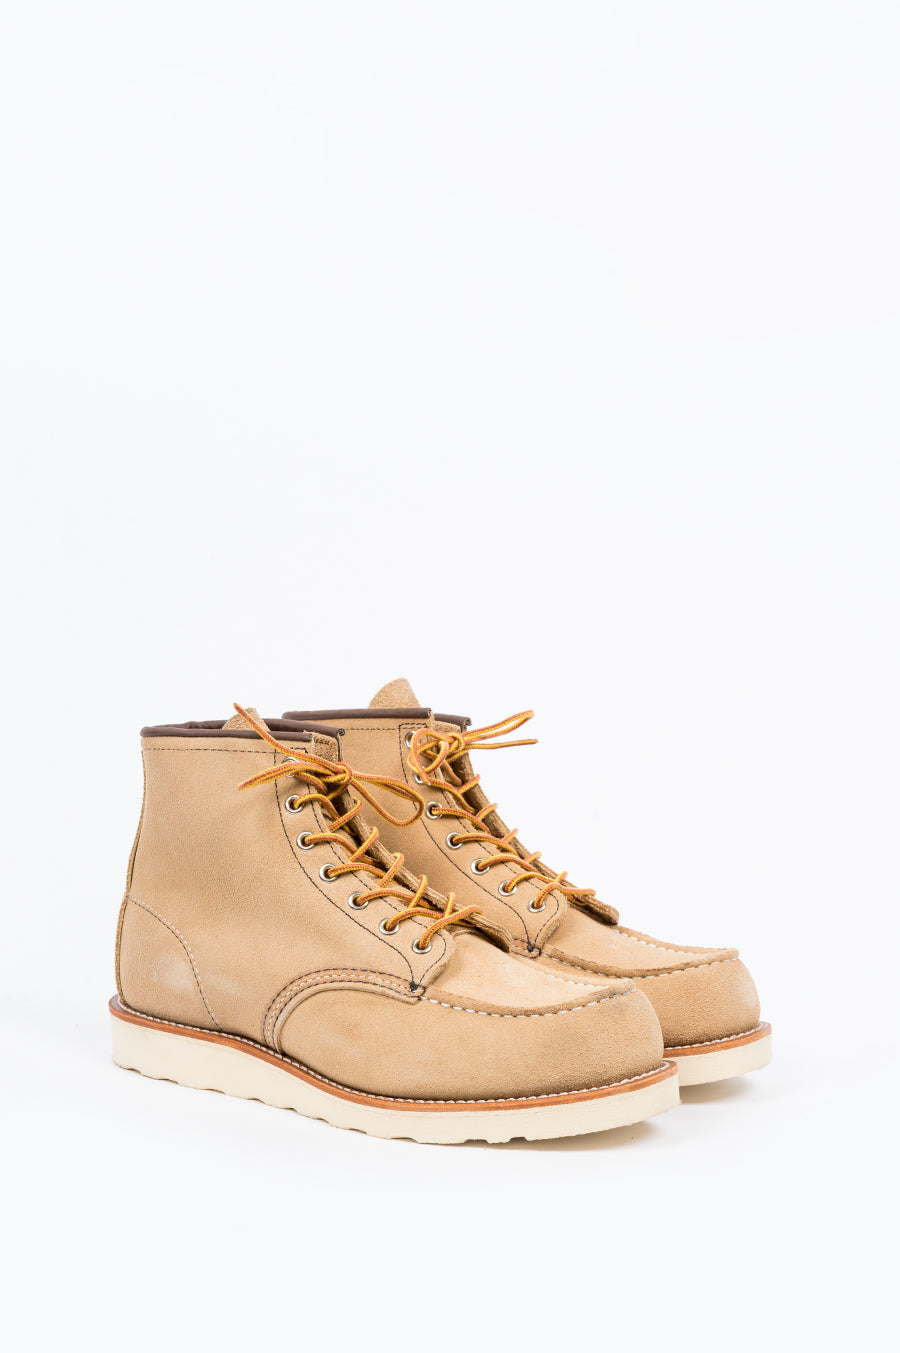 RED WING 6" BOOT CLASSIC MOC SAND - BLENDS